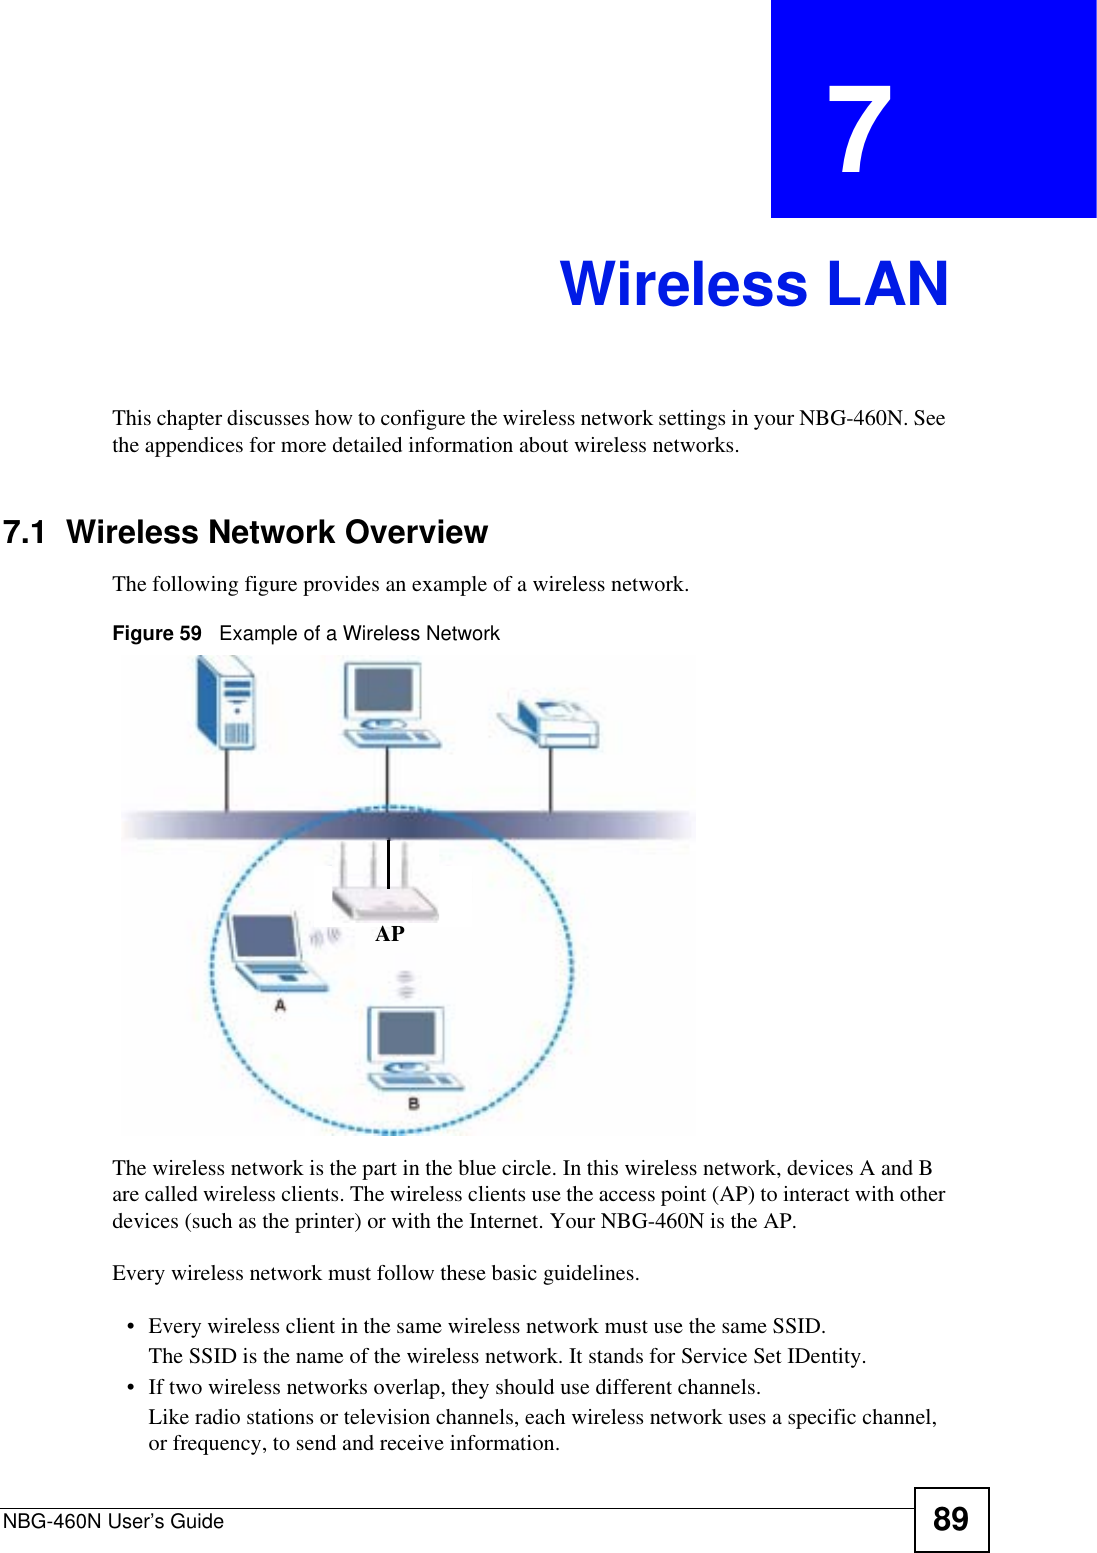 NBG-460N User’s Guide 89CHAPTER  7 Wireless LANThis chapter discusses how to configure the wireless network settings in your NBG-460N. See the appendices for more detailed information about wireless networks.7.1  Wireless Network OverviewThe following figure provides an example of a wireless network.Figure 59   Example of a Wireless NetworkThe wireless network is the part in the blue circle. In this wireless network, devices A and B are called wireless clients. The wireless clients use the access point (AP) to interact with other devices (such as the printer) or with the Internet. Your NBG-460N is the AP.Every wireless network must follow these basic guidelines.• Every wireless client in the same wireless network must use the same SSID.The SSID is the name of the wireless network. It stands for Service Set IDentity.• If two wireless networks overlap, they should use different channels.Like radio stations or television channels, each wireless network uses a specific channel, or frequency, to send and receive information.AP